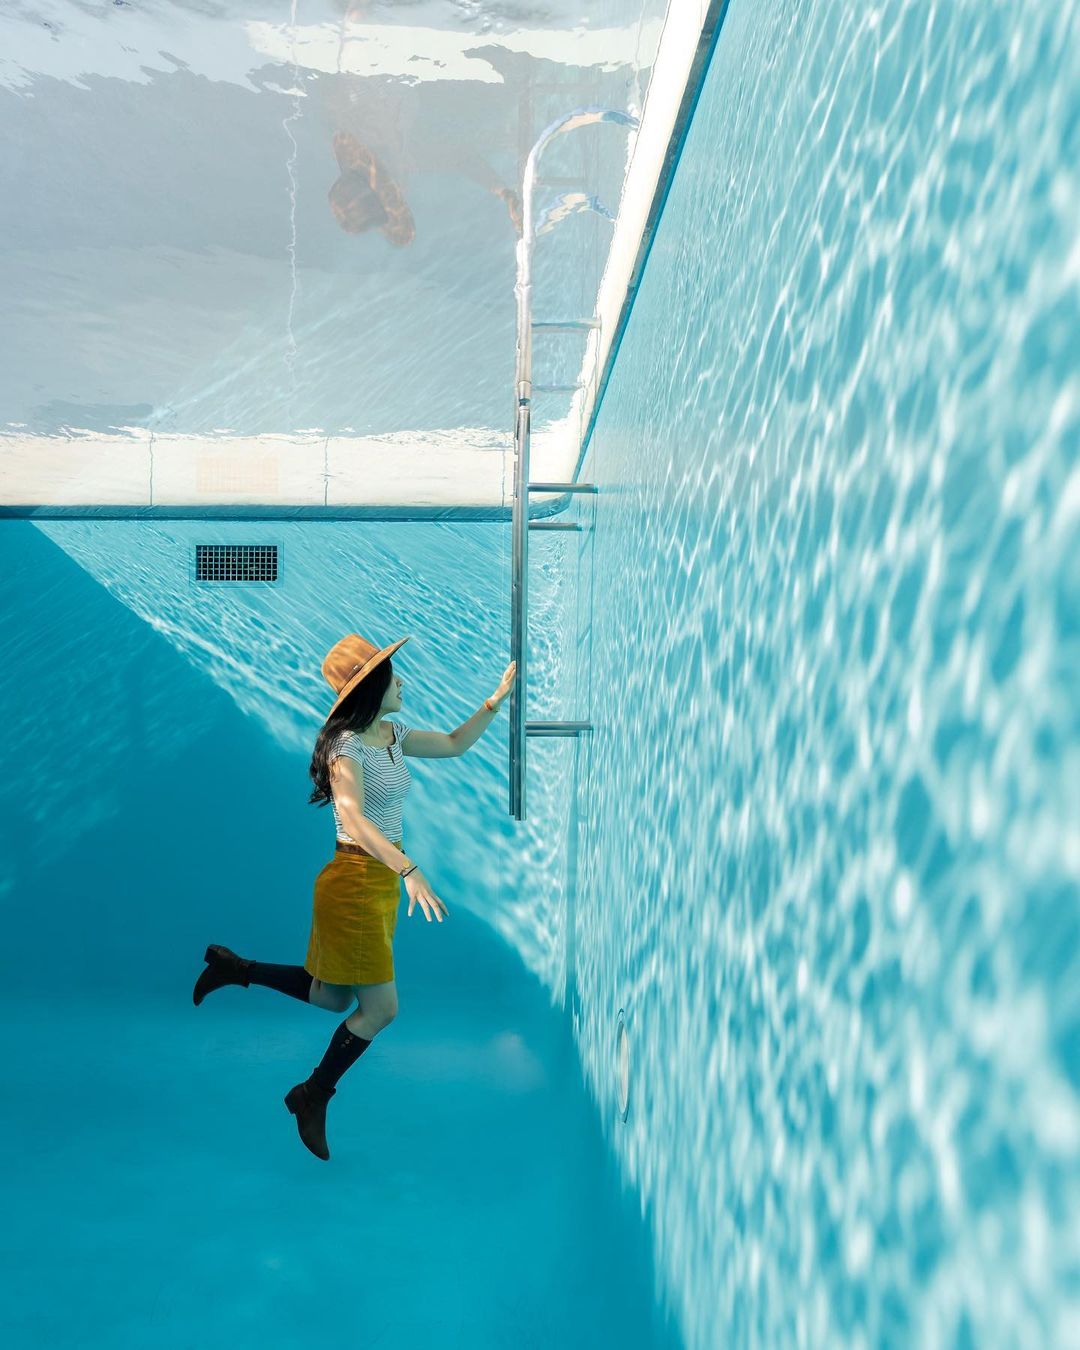 Art museums in Japan - “Swimming Pool” by Leandro Erlich